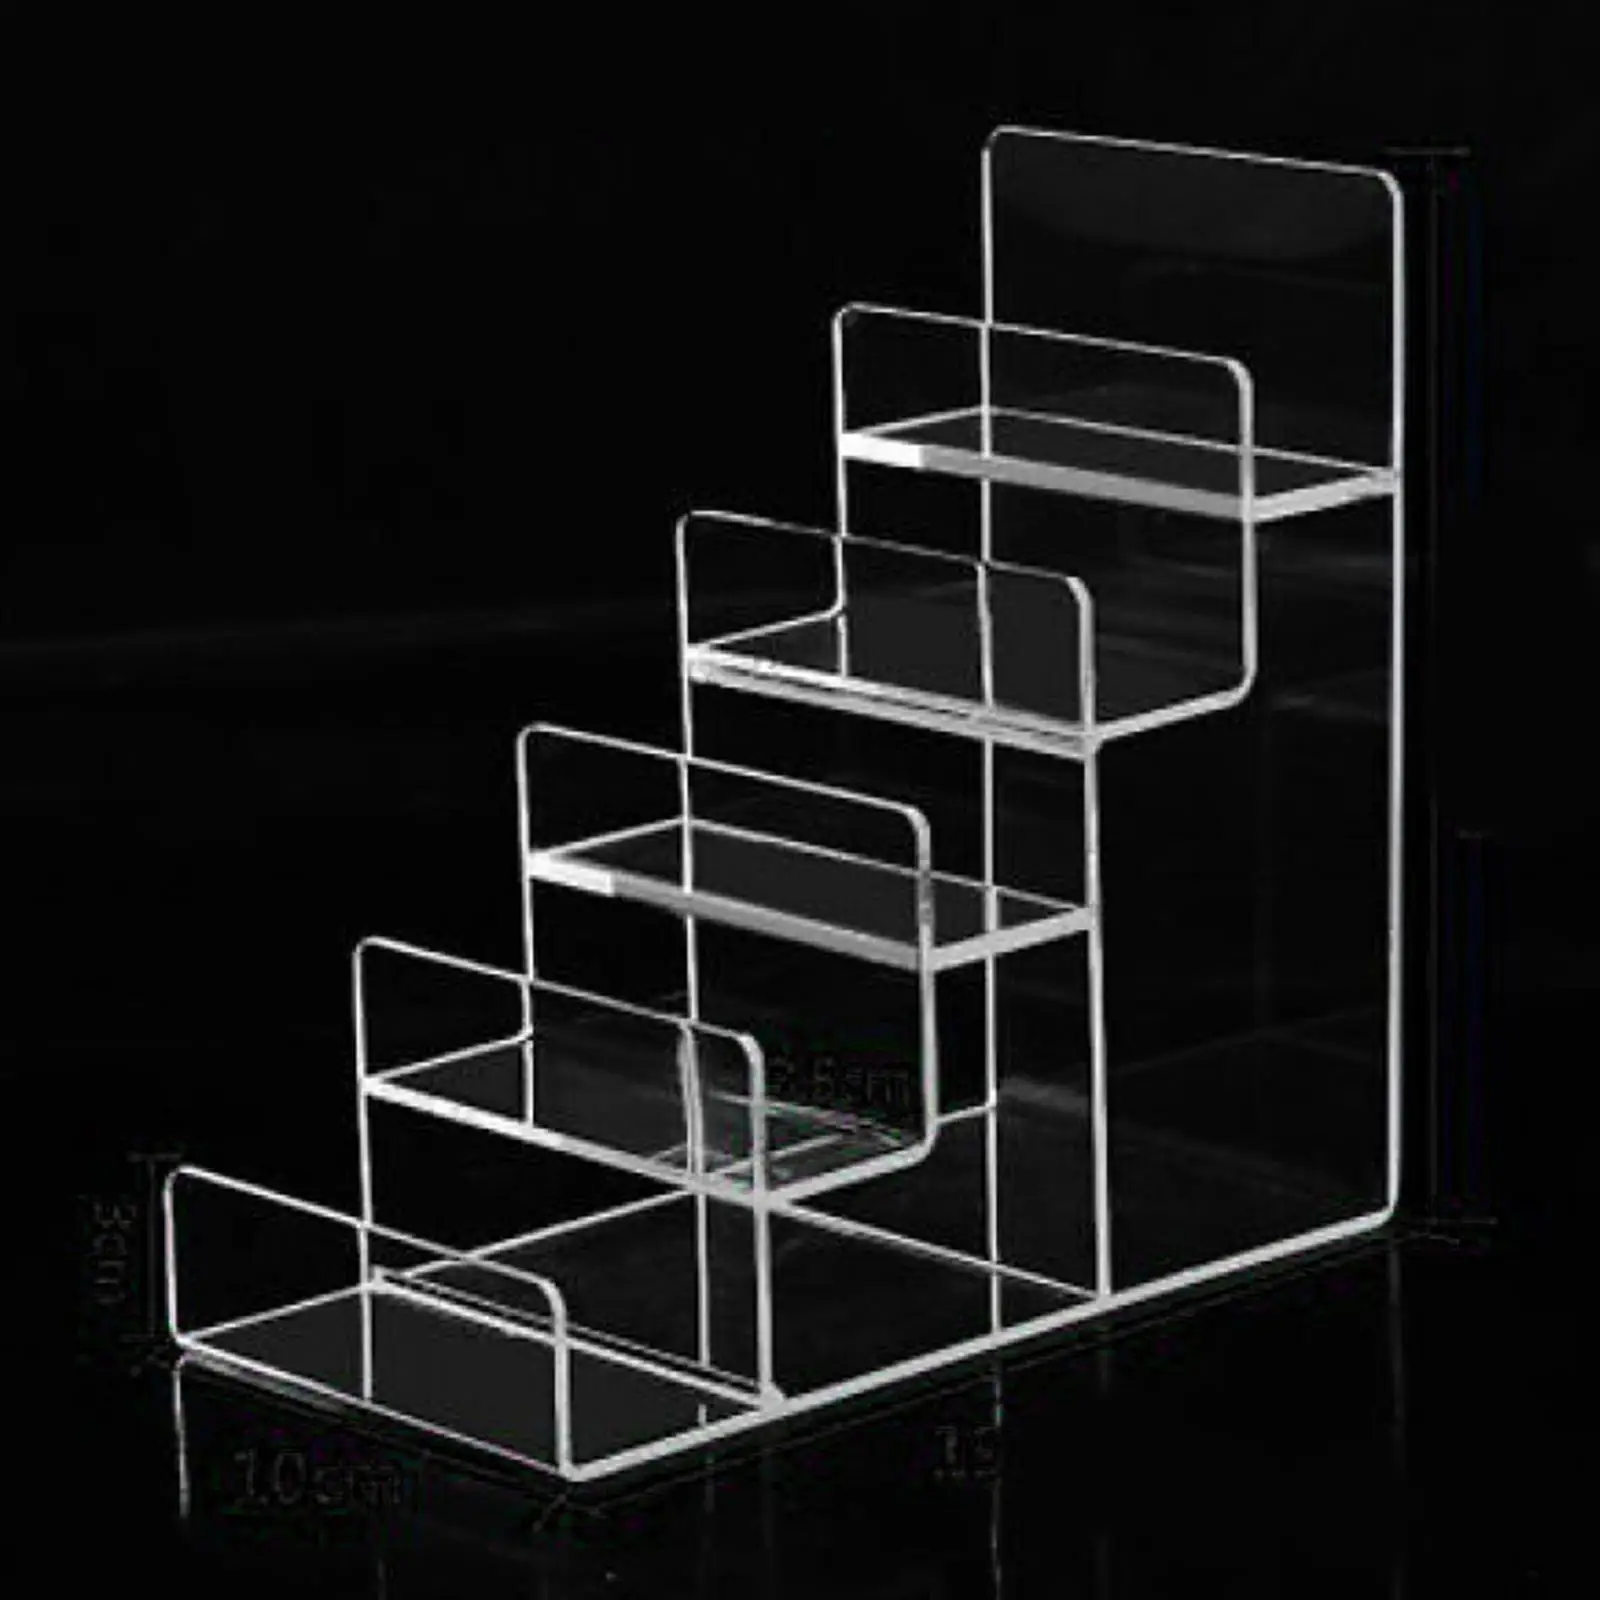 Clear Acrylic Jewelry Display Riser Shelf Organizer Showcase Fixtures for Mobile Glasses Figures Cosmetic Retail/Shop